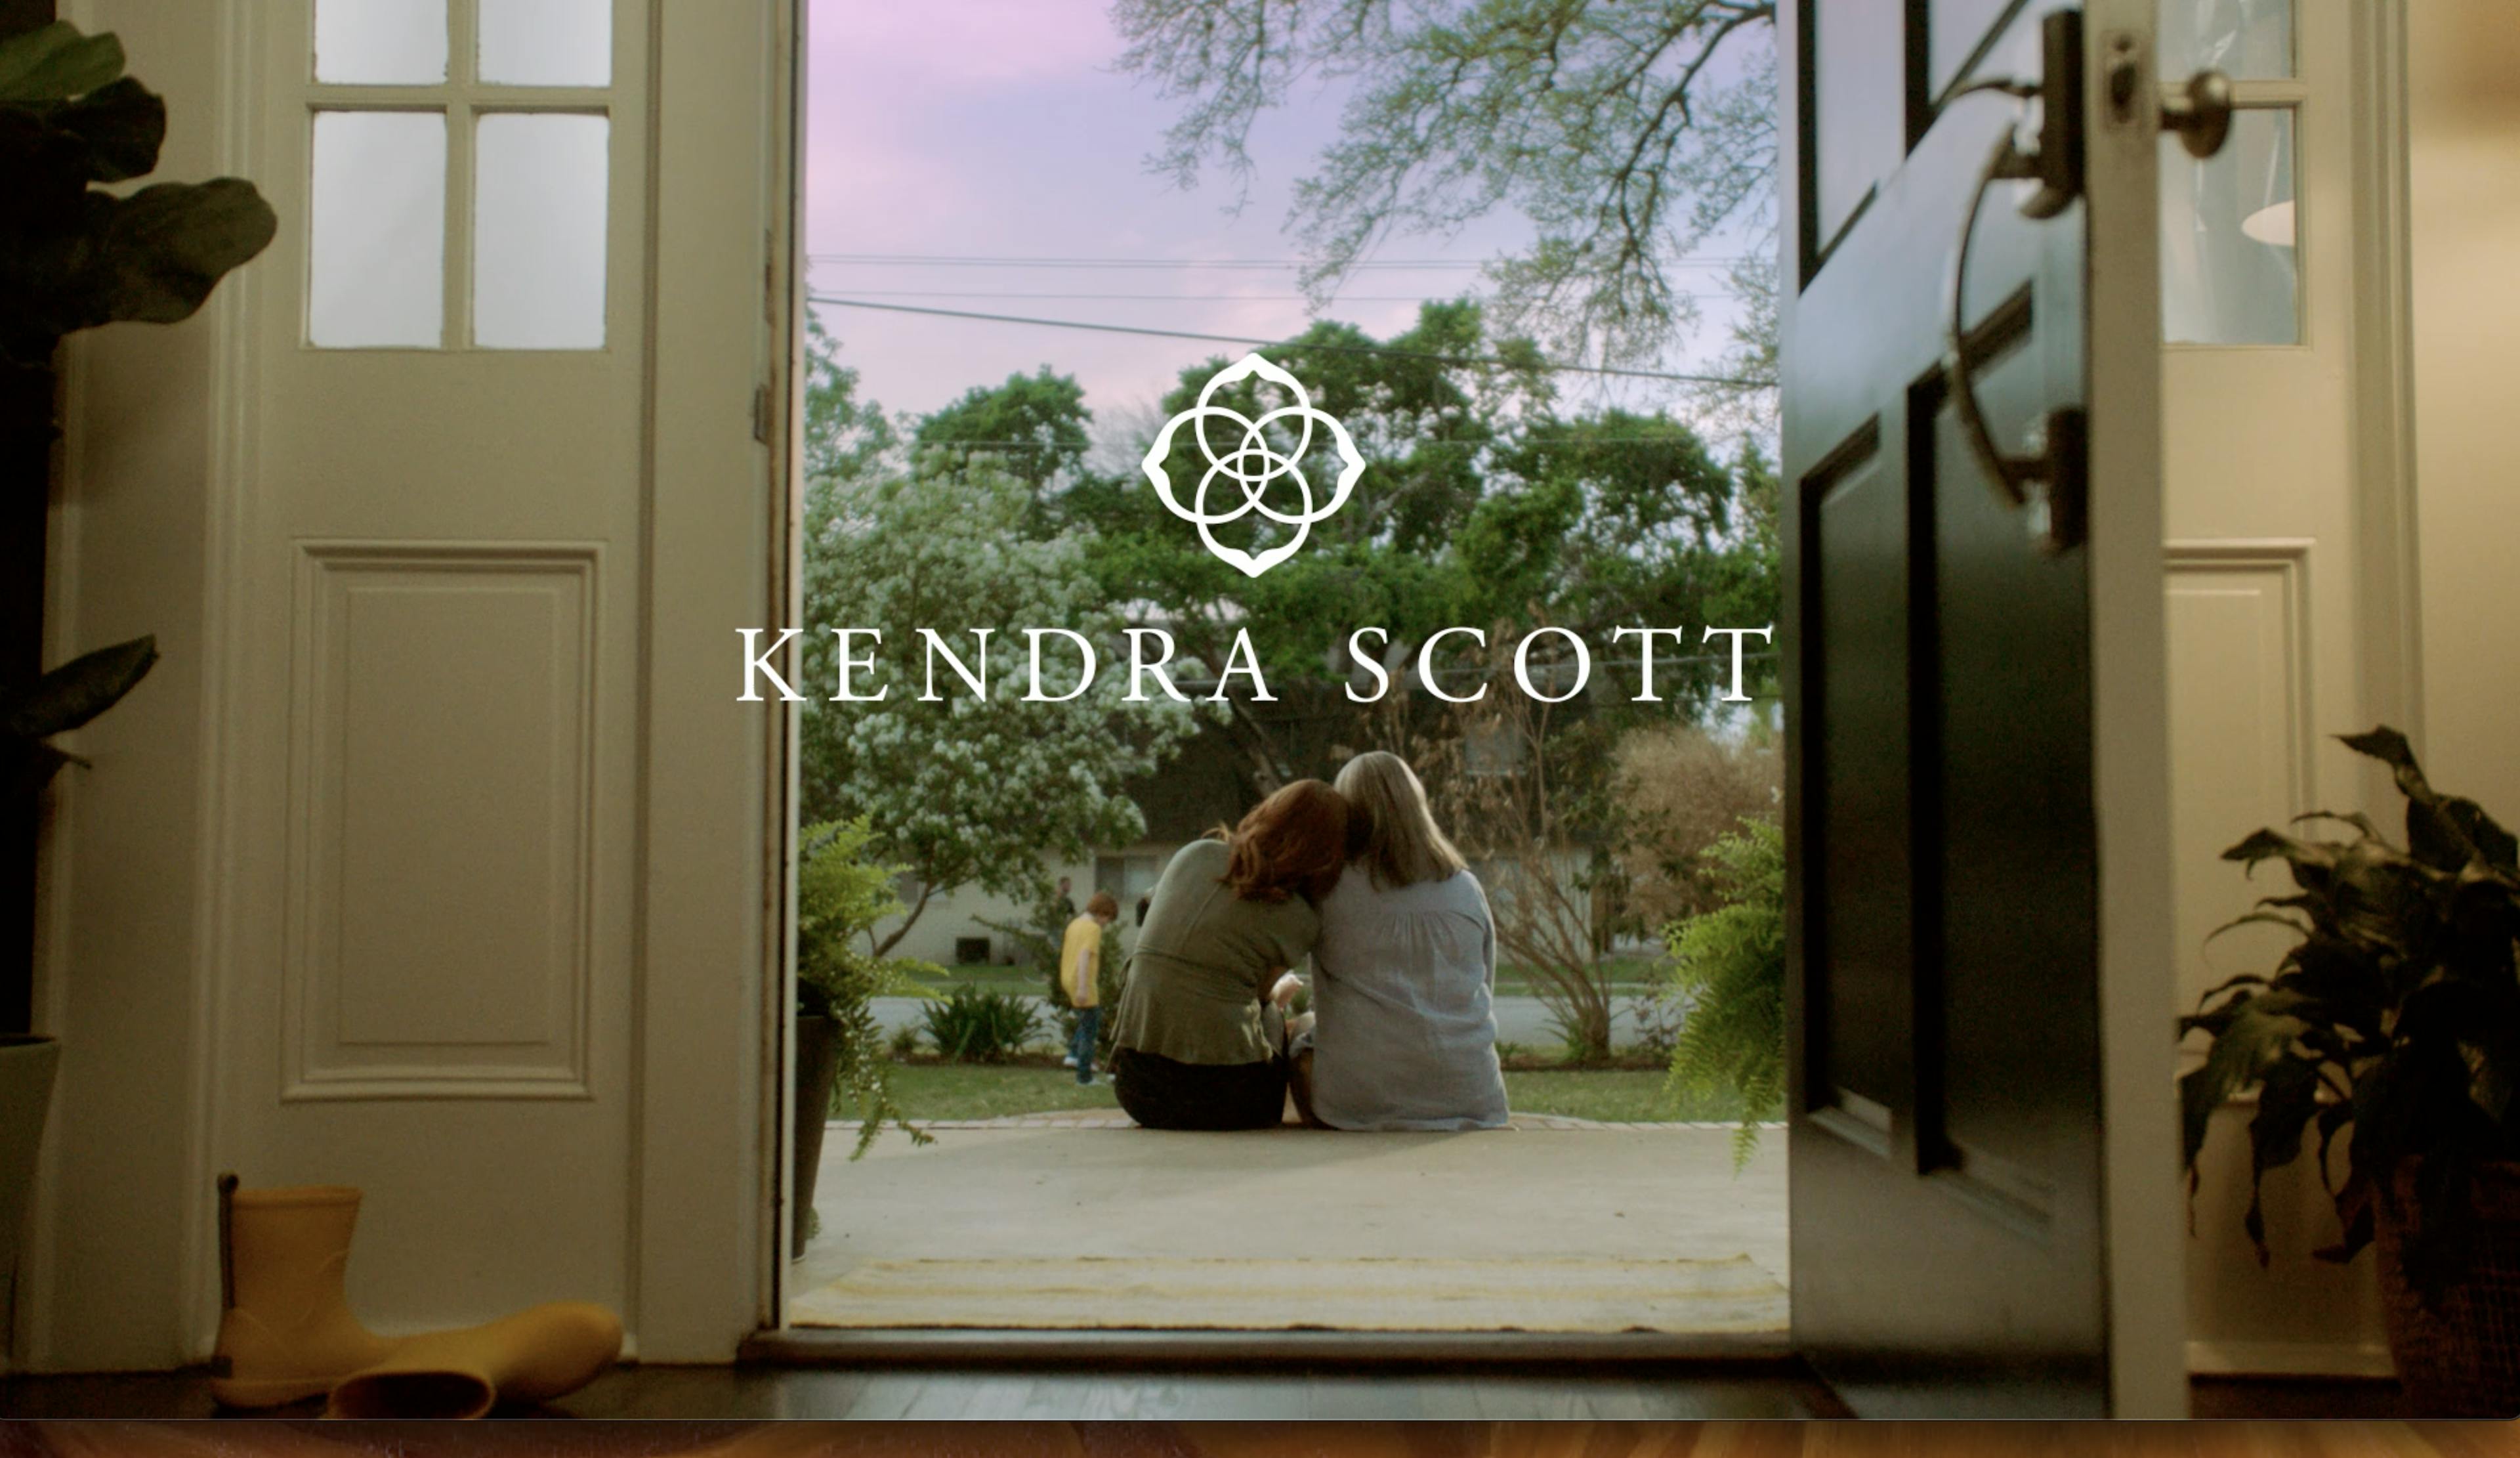 Viewed from the back, two women sit side by side on their front porch with the Kendra Scott logo overlaying the image